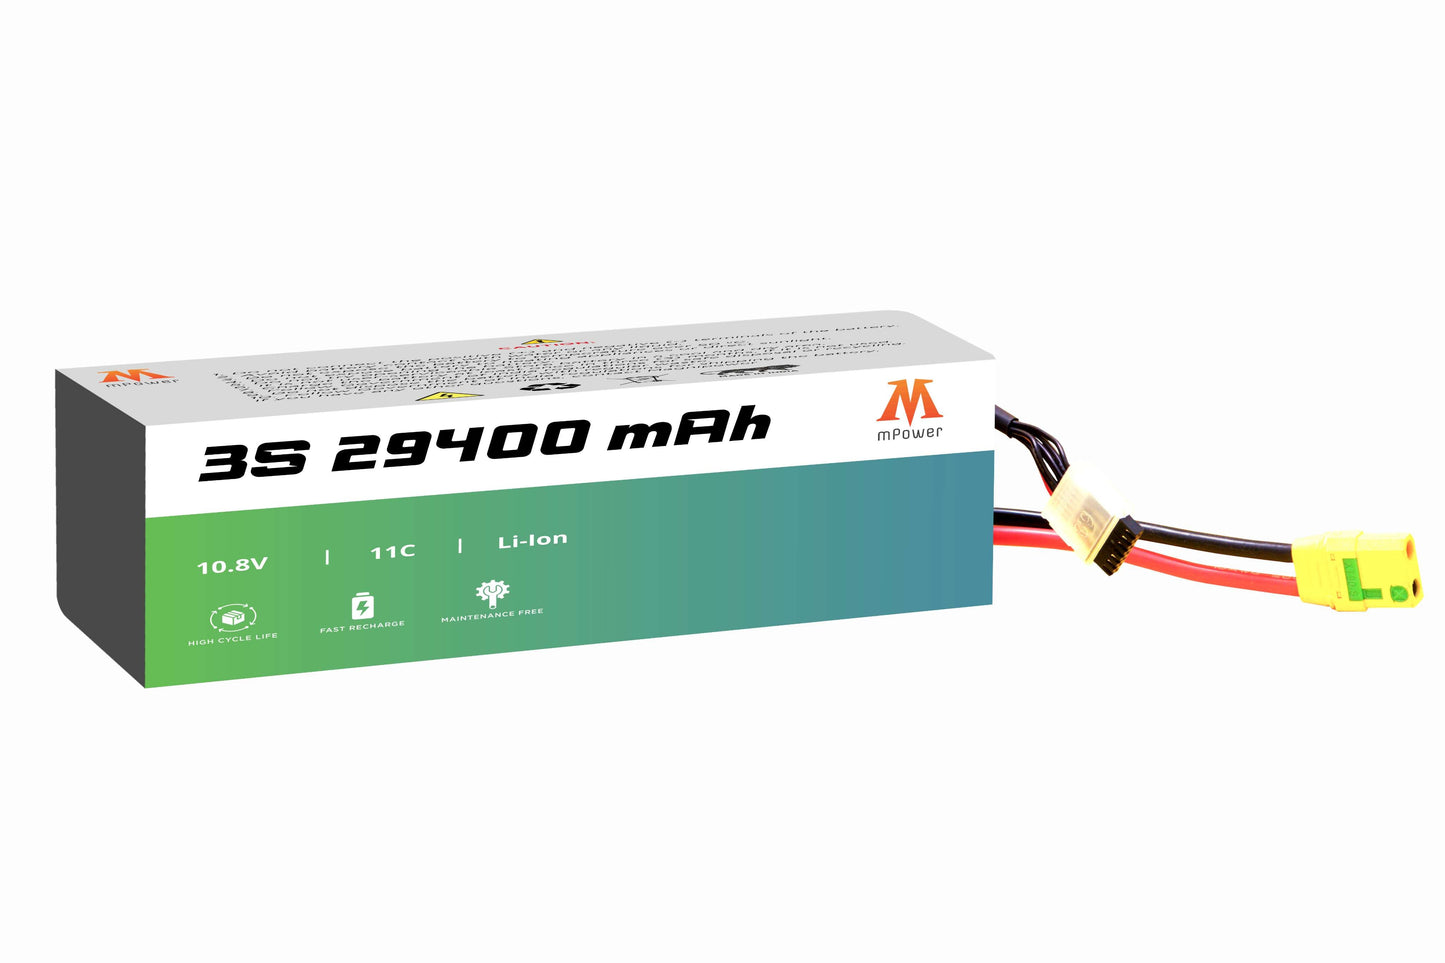 mPower 3S 29400mAh Lithium-Ion Battery for Surveillance Drones